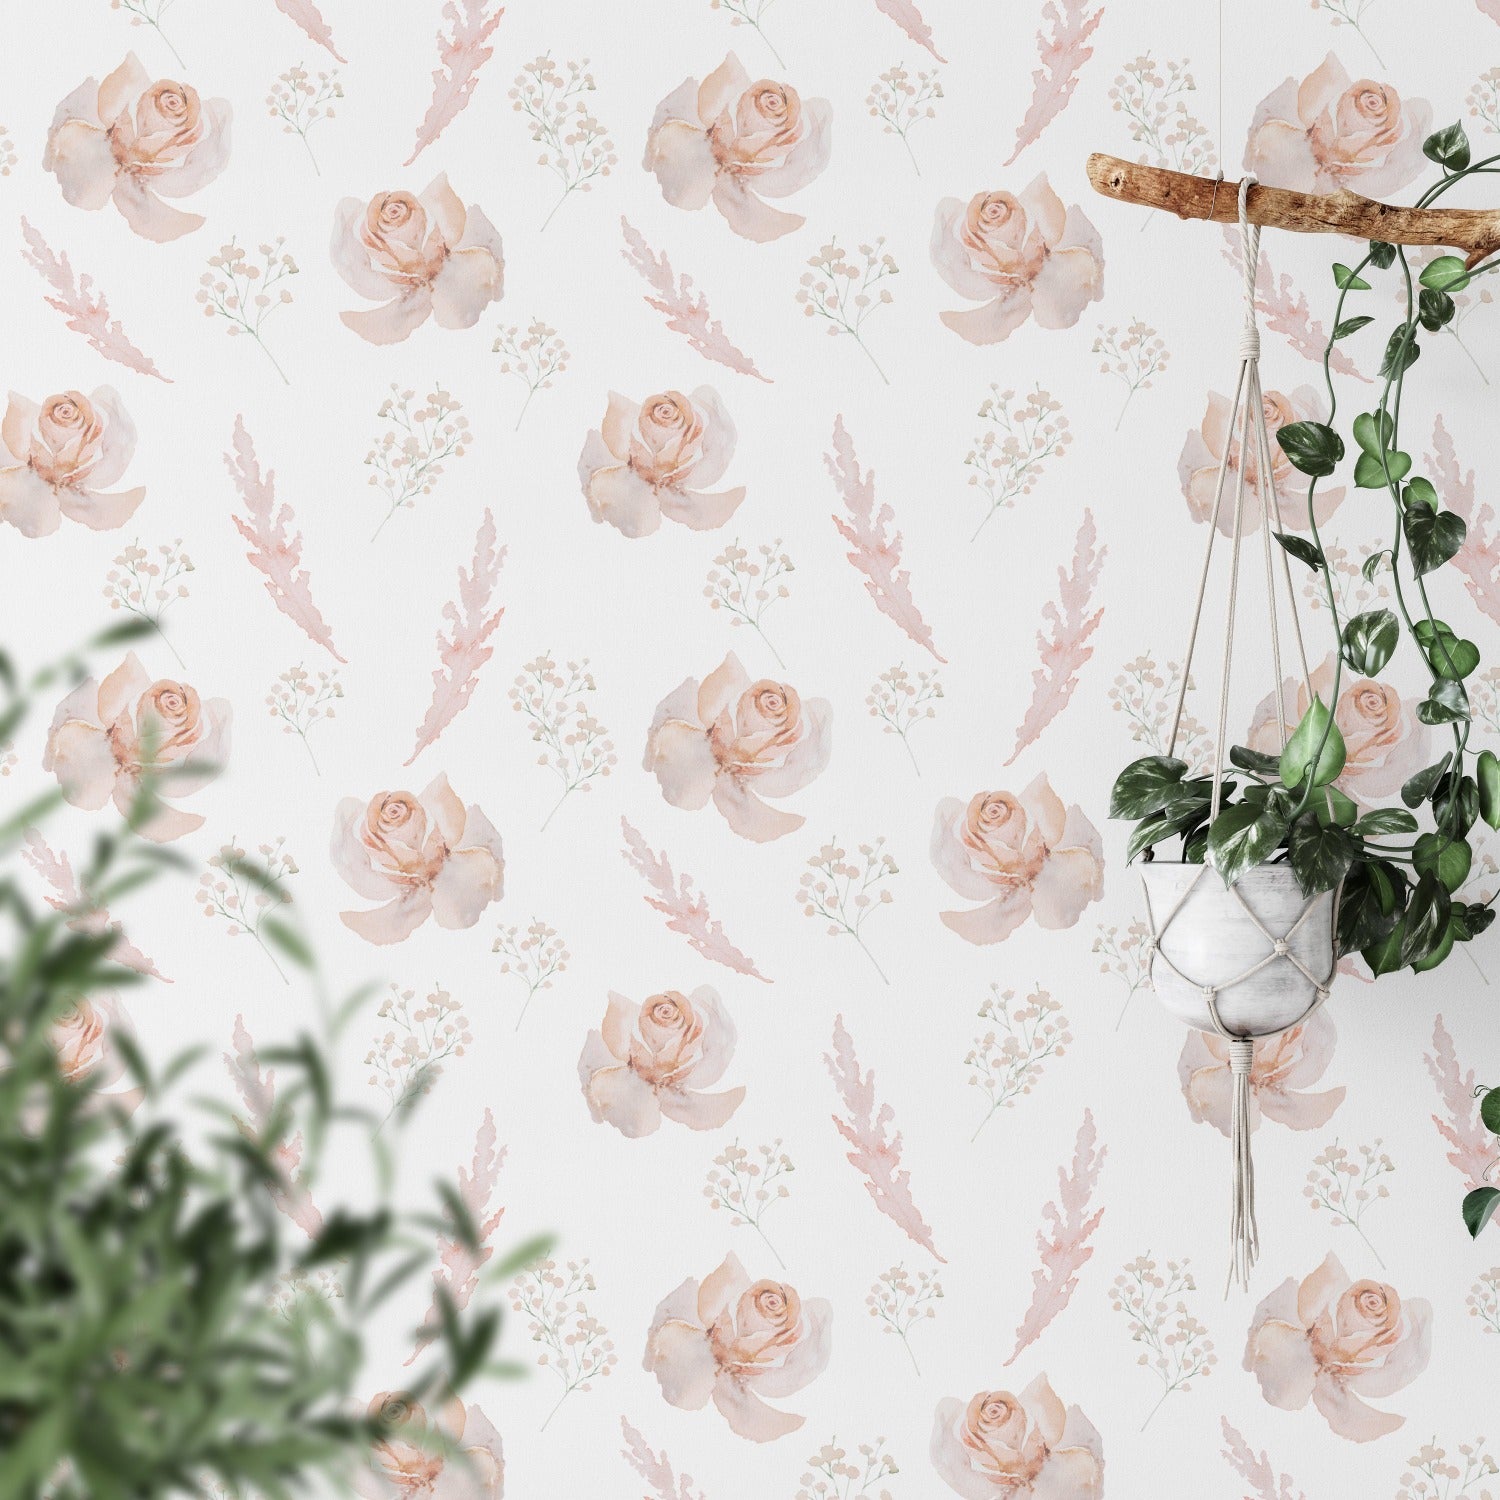 A room decorated with pastel watercolor floral wallpaper. The design showcases peach and pink roses, baby's breath, and light coral leaves on a white background, complementing the greenery of a hanging plant and potted plants in the foreground.